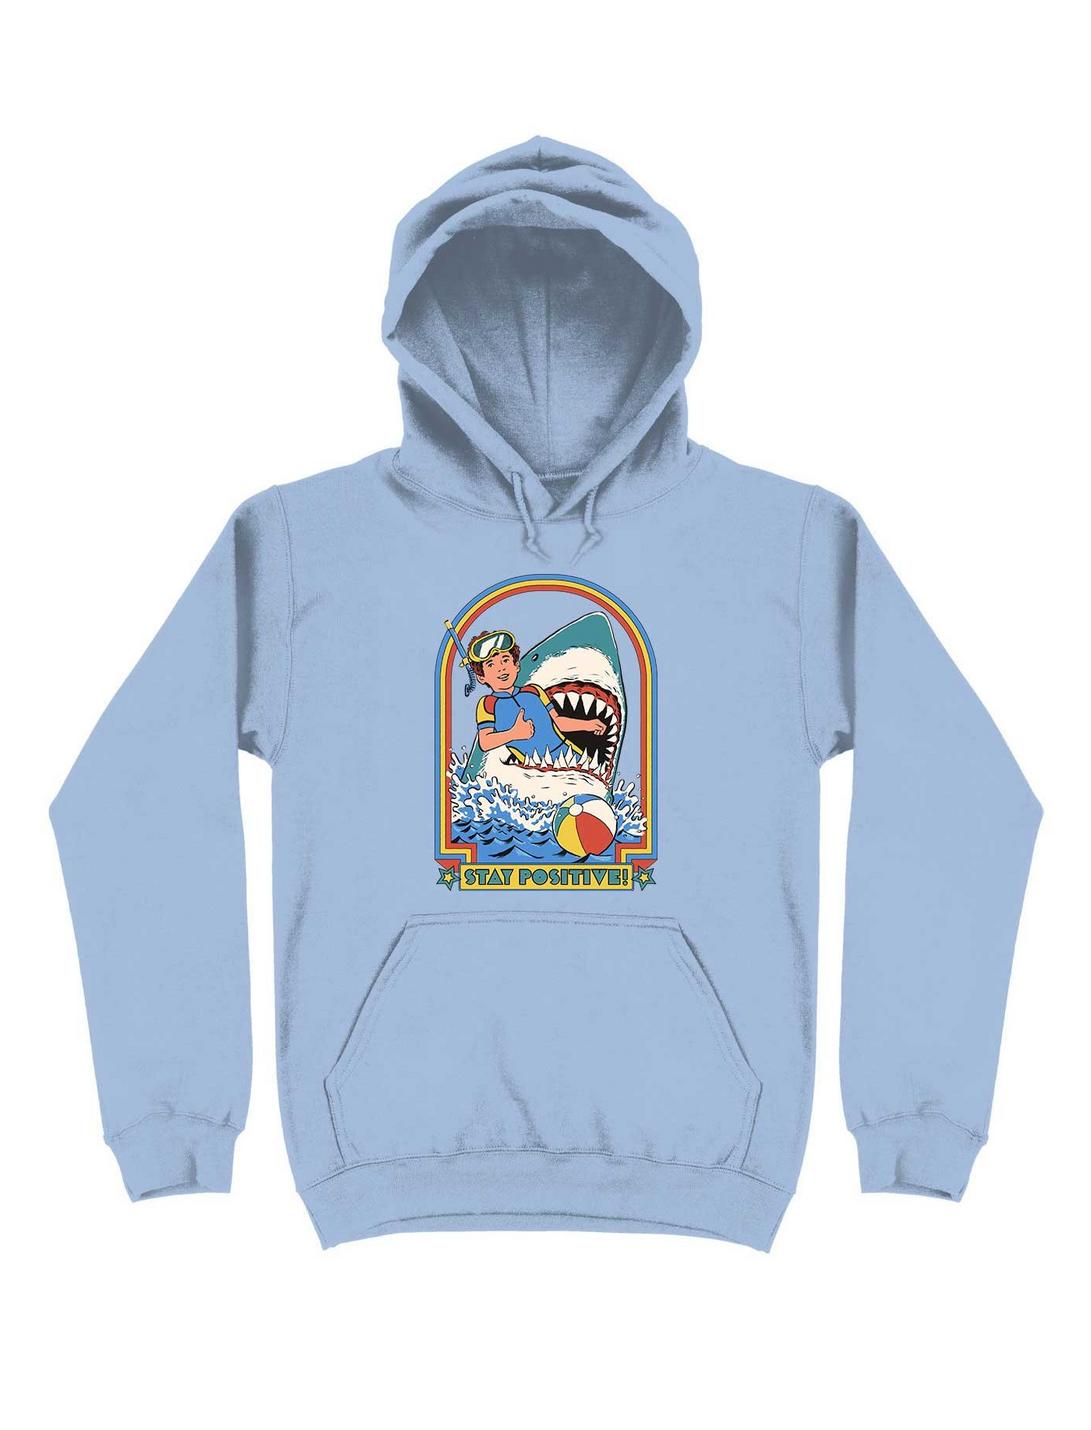 Stay Positive Hoodie By Steven Rhodes, LIGHT BLUE, hi-res